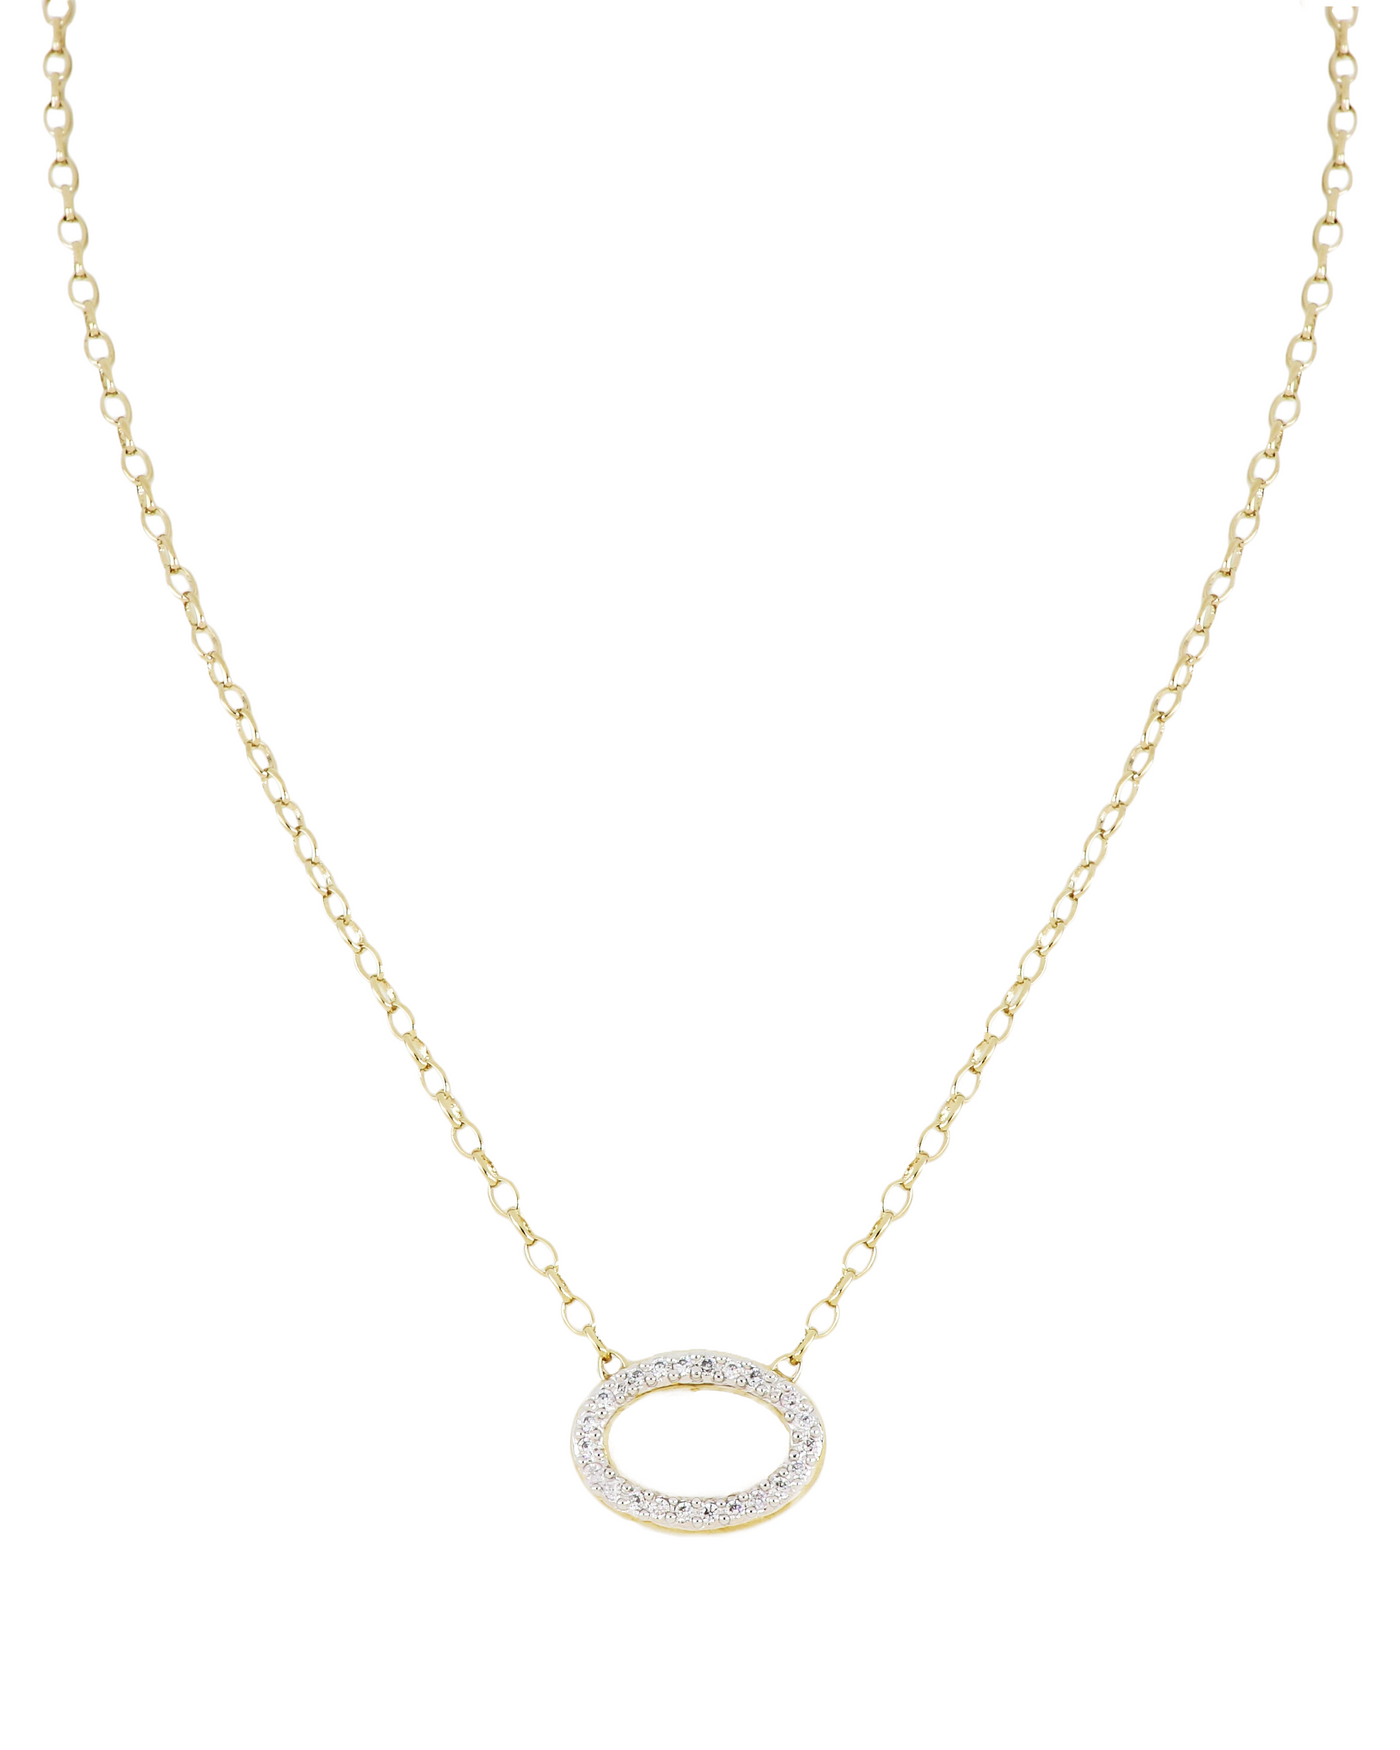 Aldrava Collection - Oval Pavé Necklace in Gold